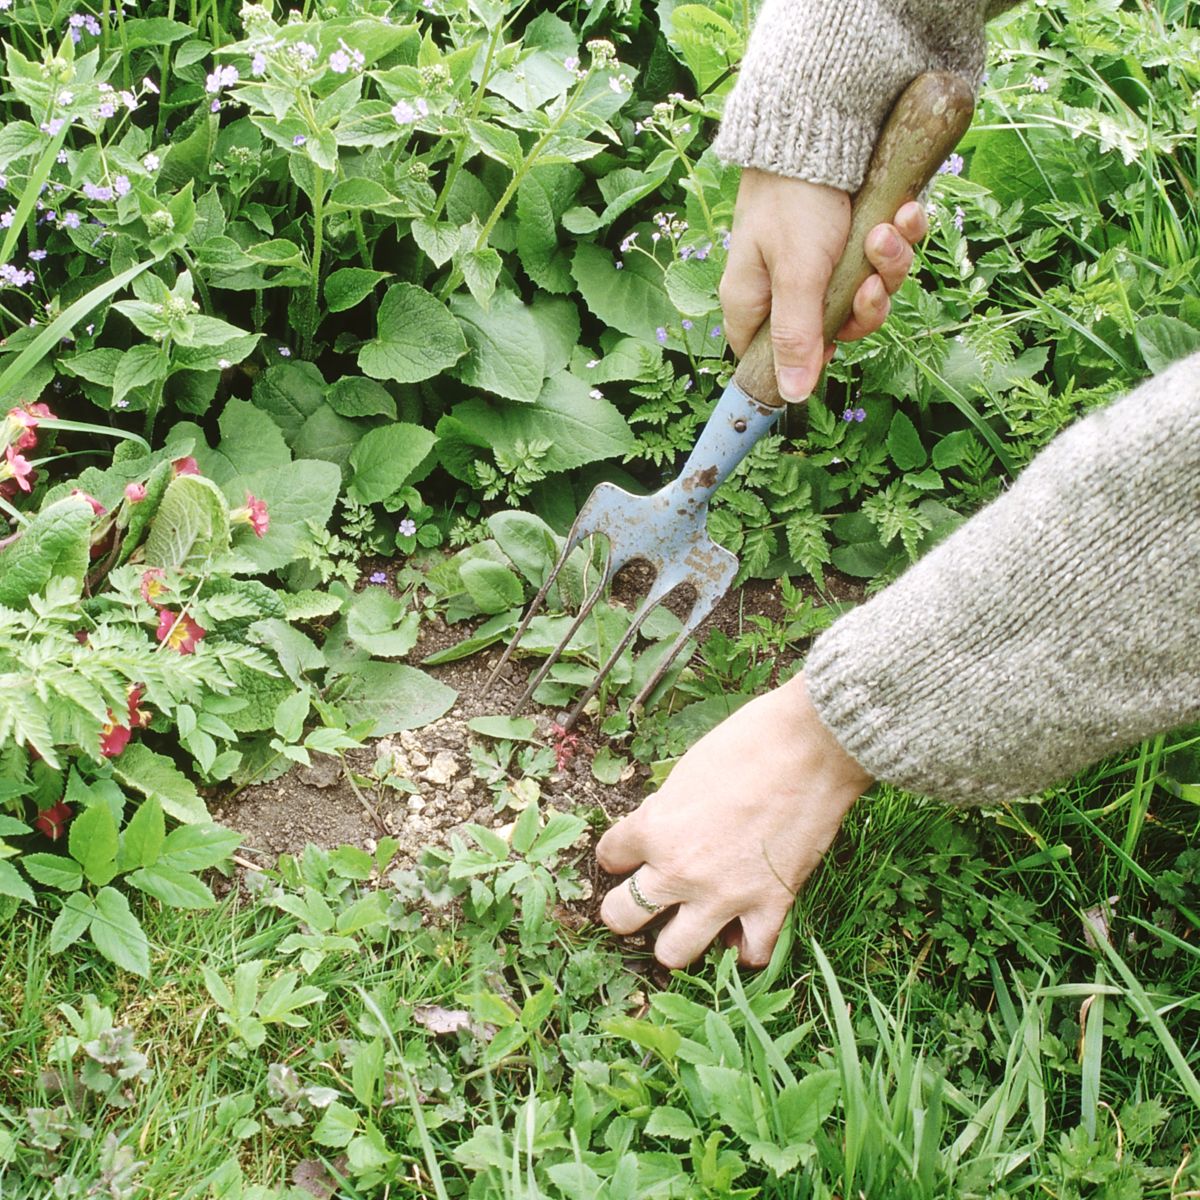 How to remove weeds from gravel – 7 ways to tackle these unwanted plants